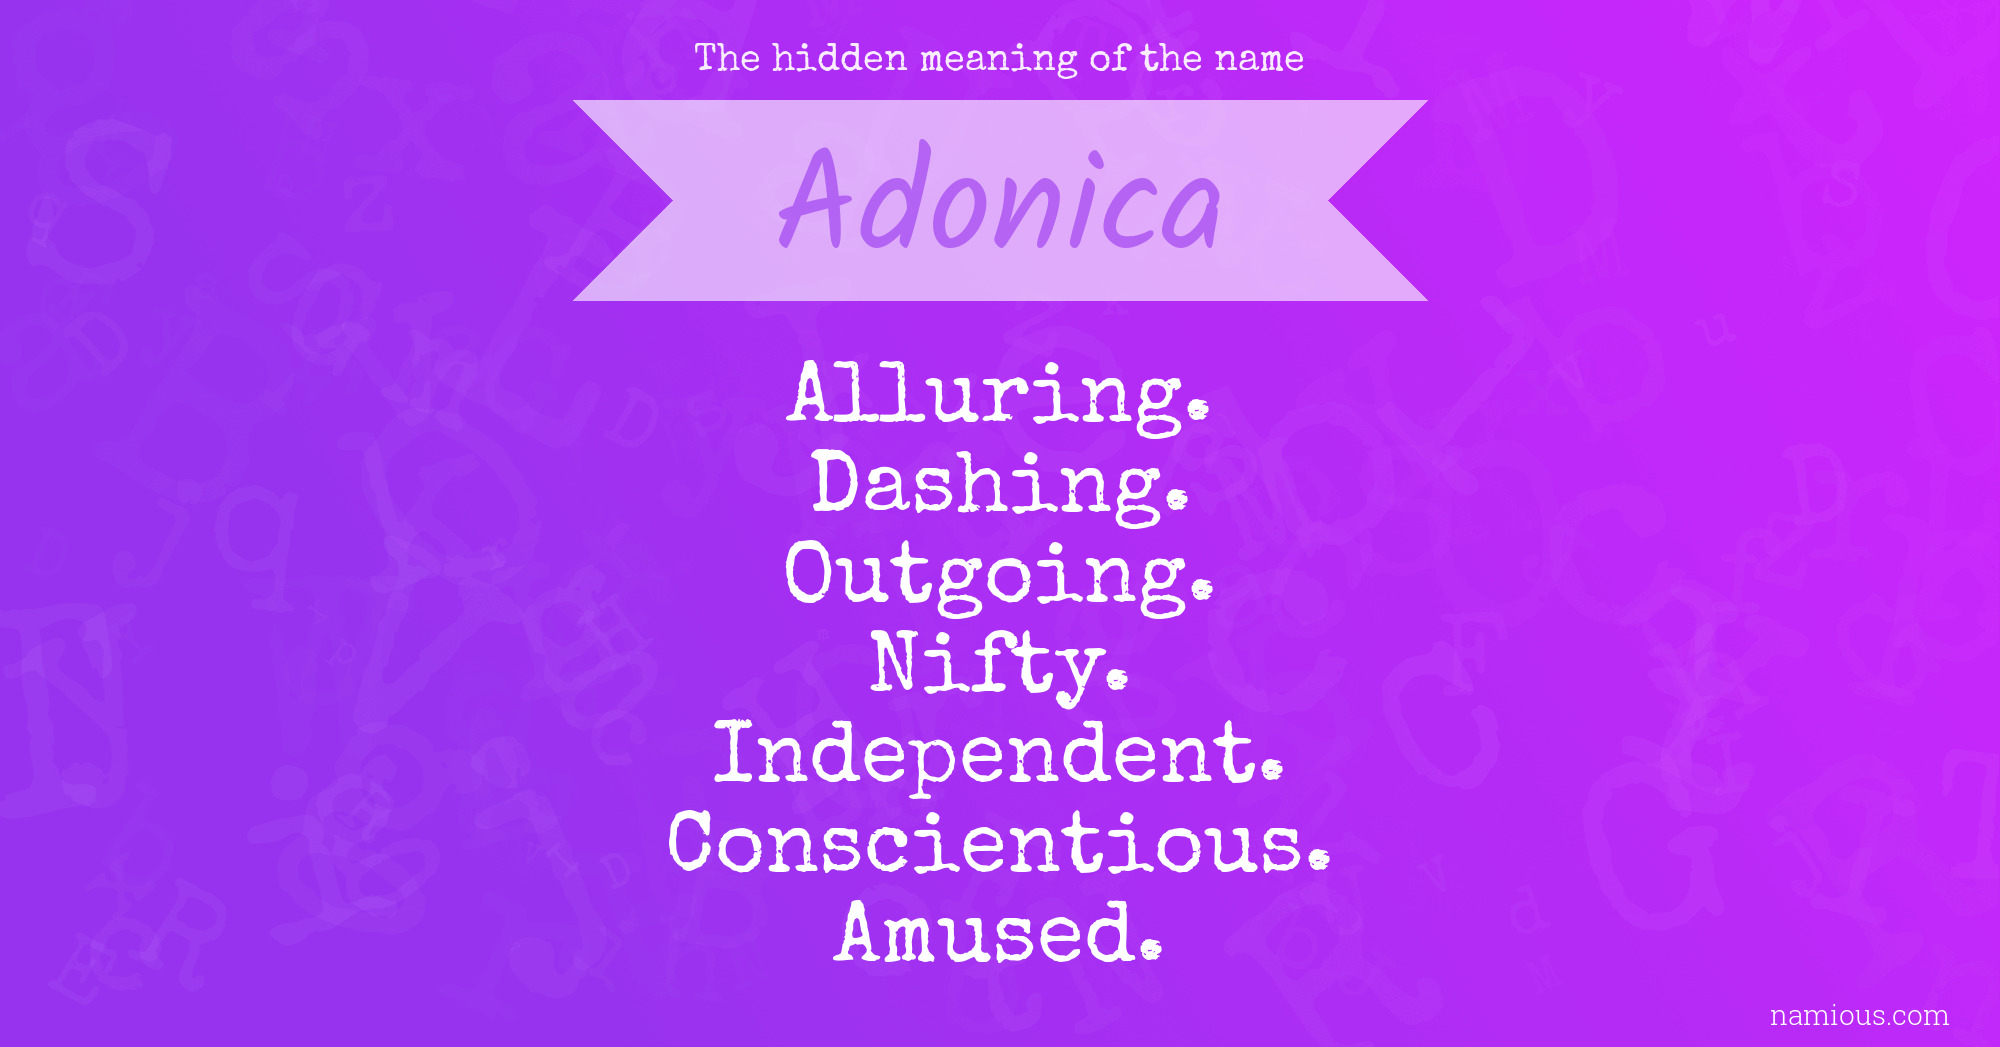 The hidden meaning of the name Adonica